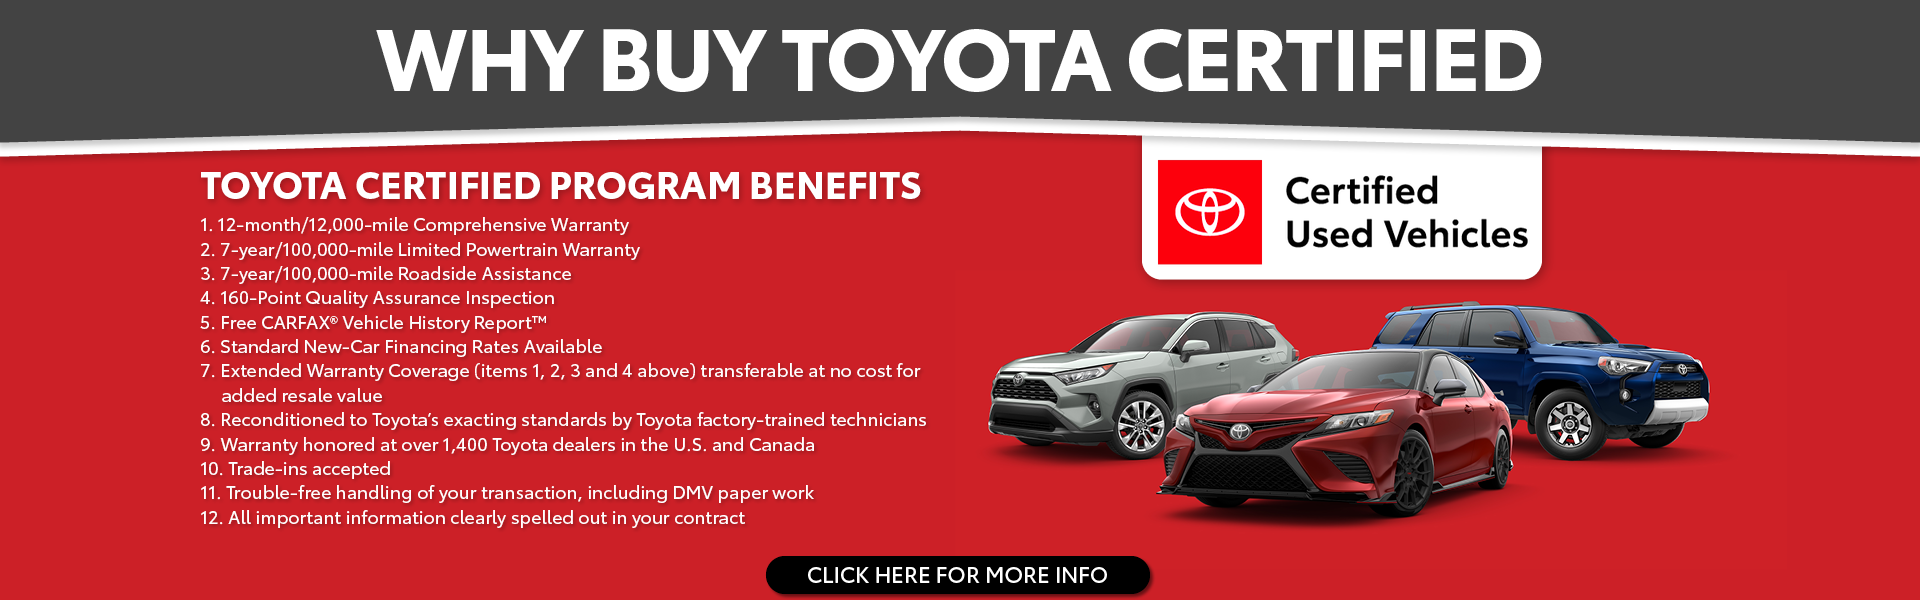 Why Buy Toyota Certified